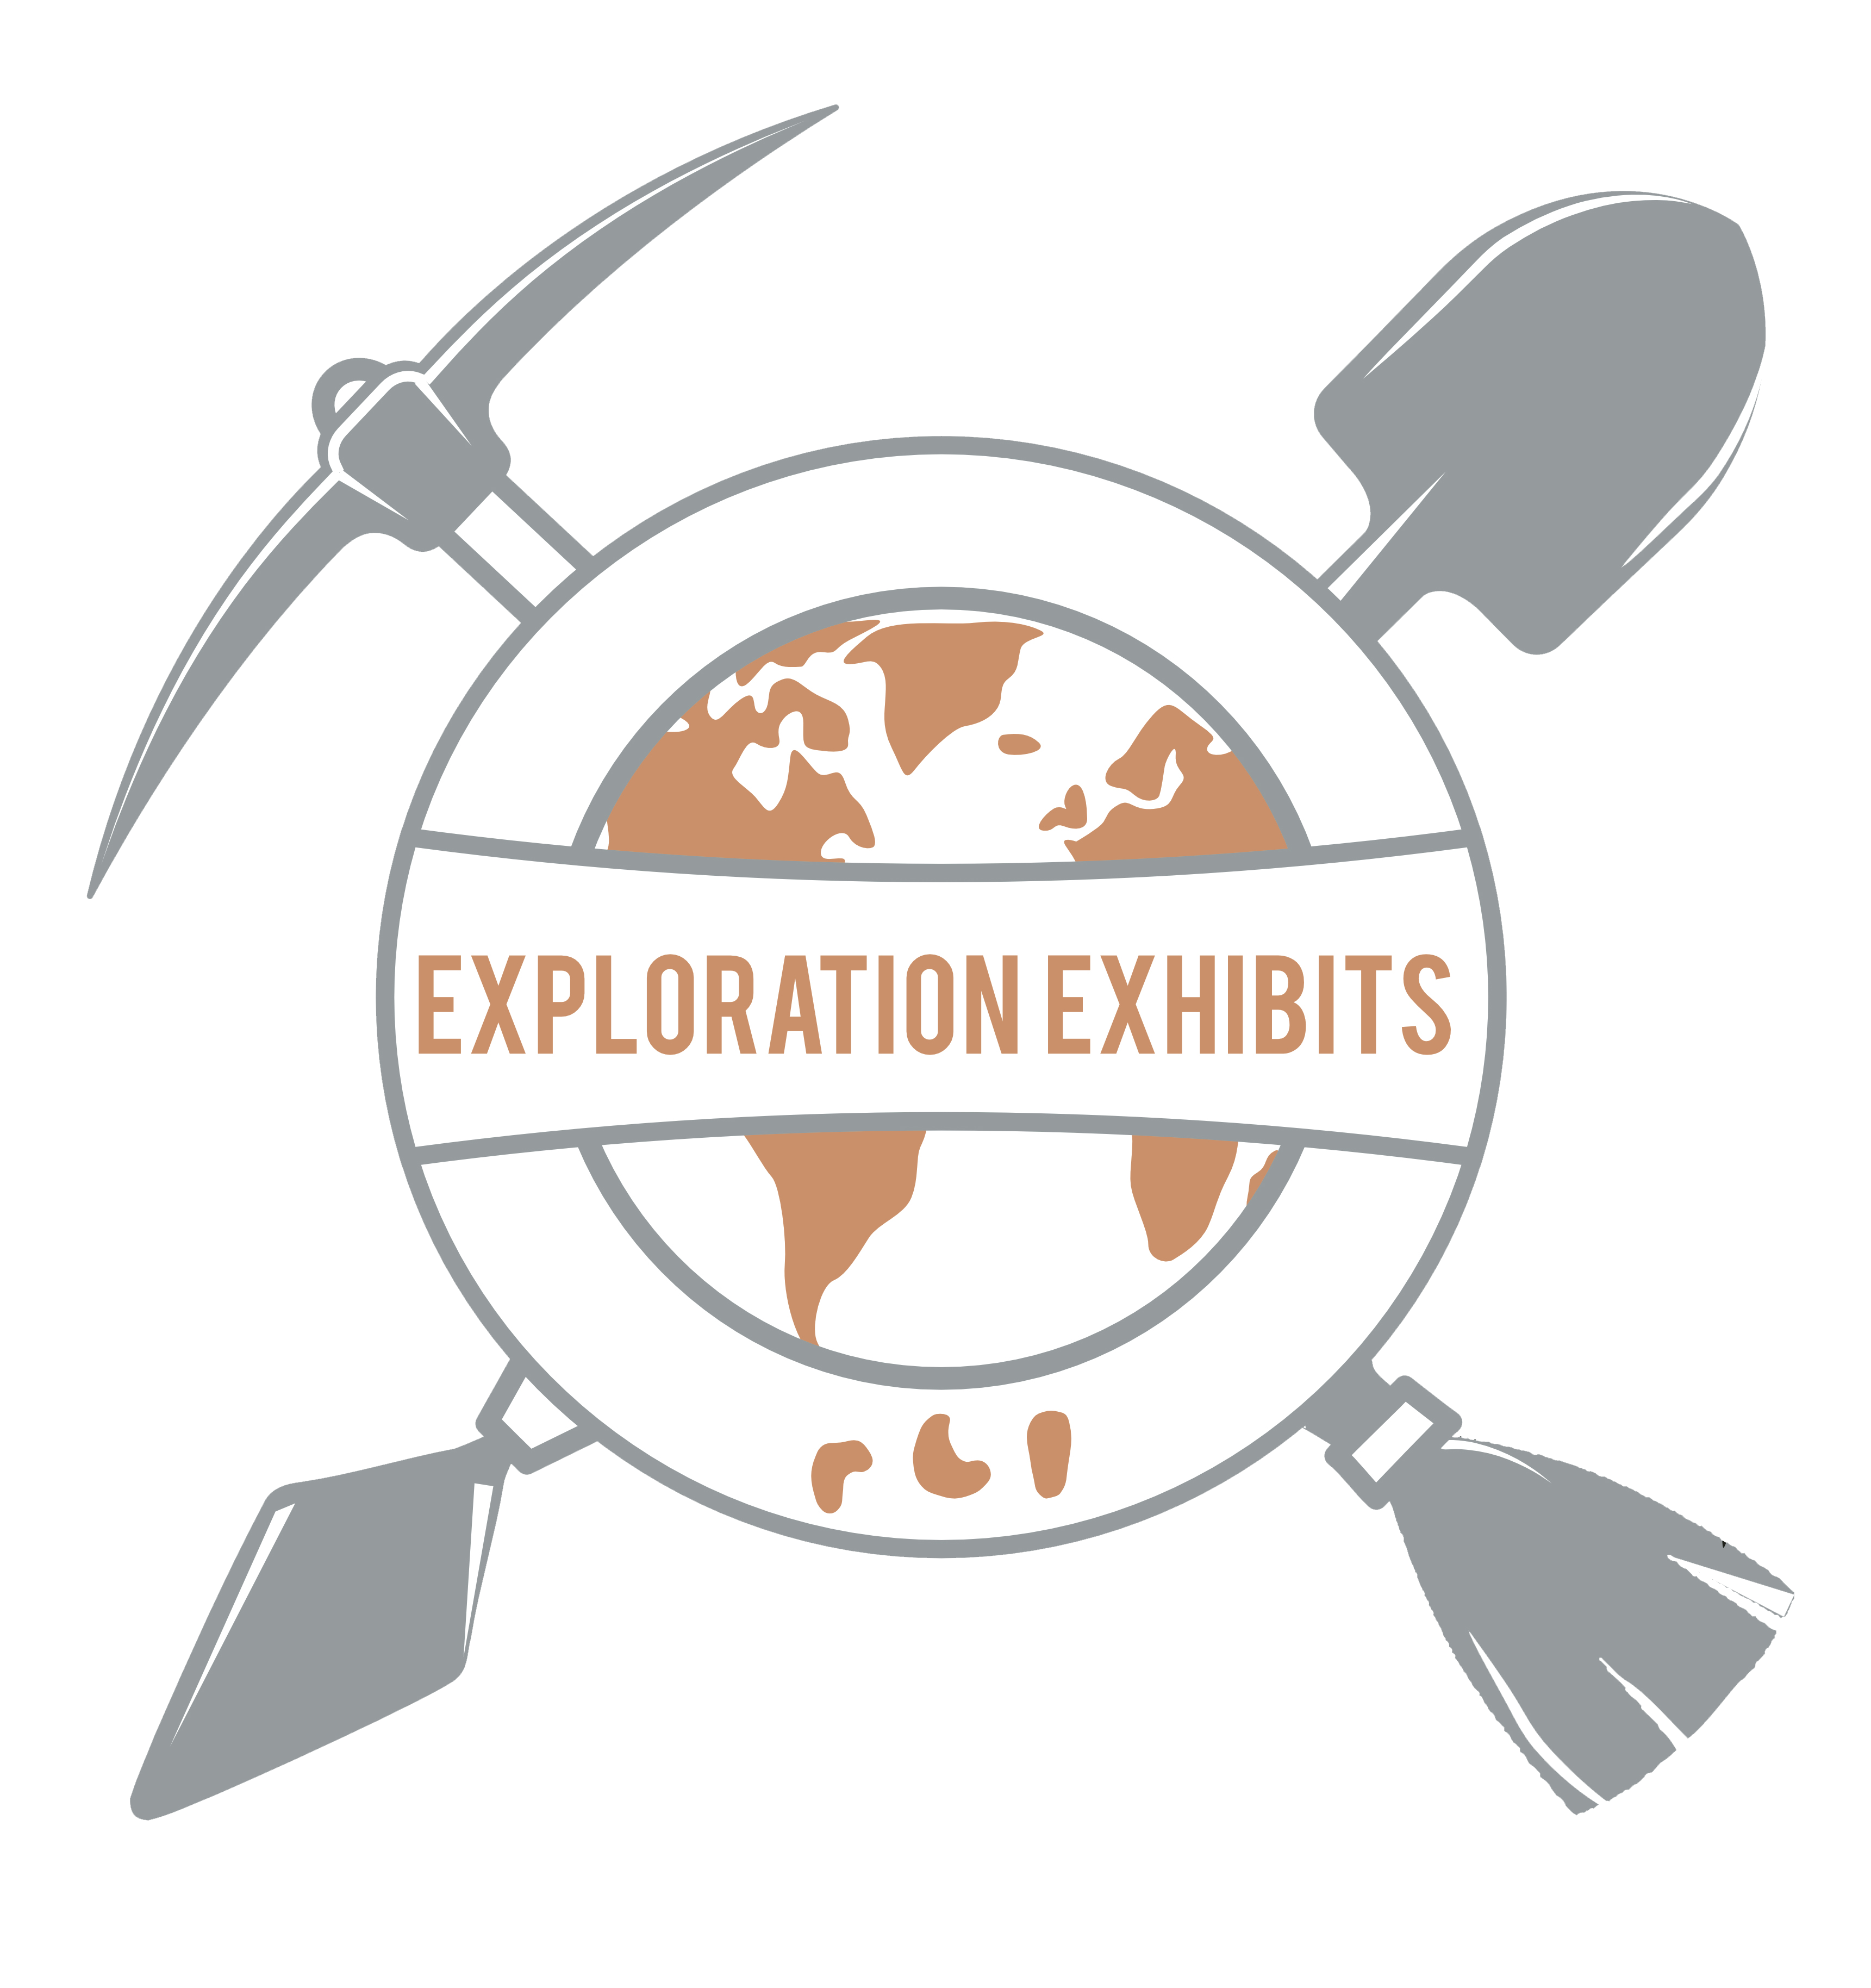 Exploration Exhibits by Research Casting International